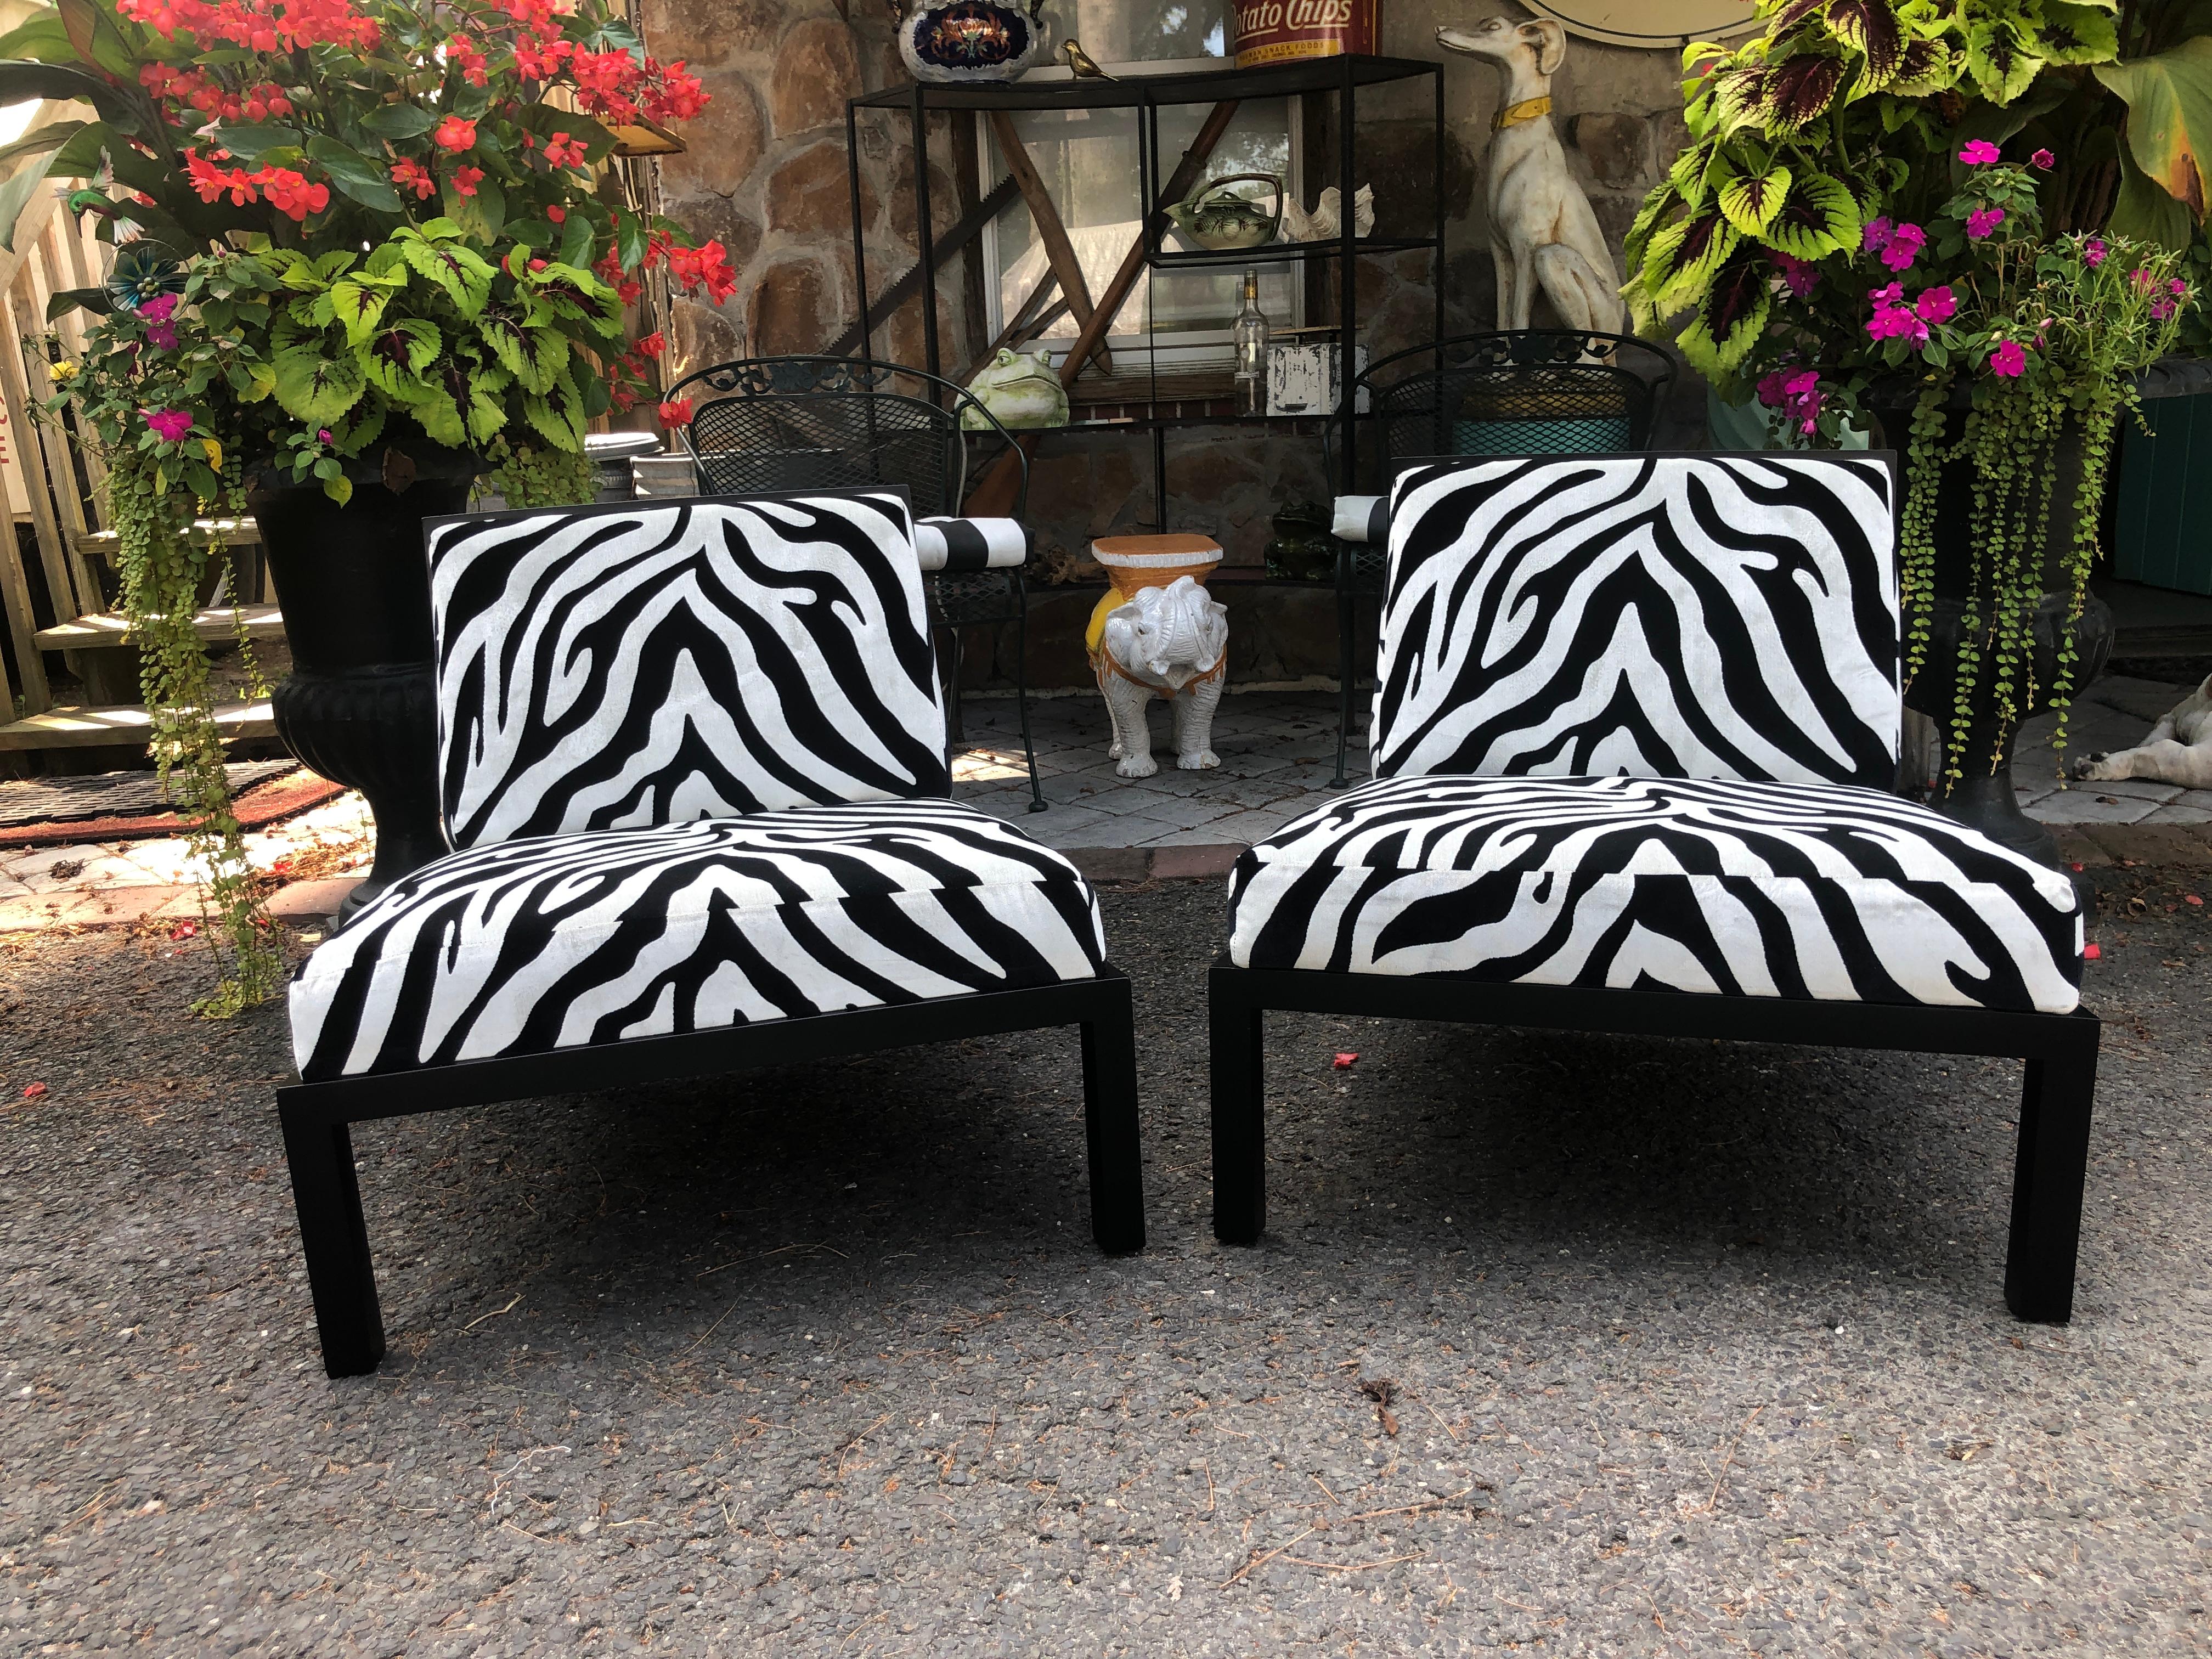 Stunning pair of Michael Taylor black lacquered slipper chairs by Baker. These fine chairs have been meticulously restored to like new condition-see photos. The frames have been re lacquered and the upholstery is brand new high end zebra velvet. The